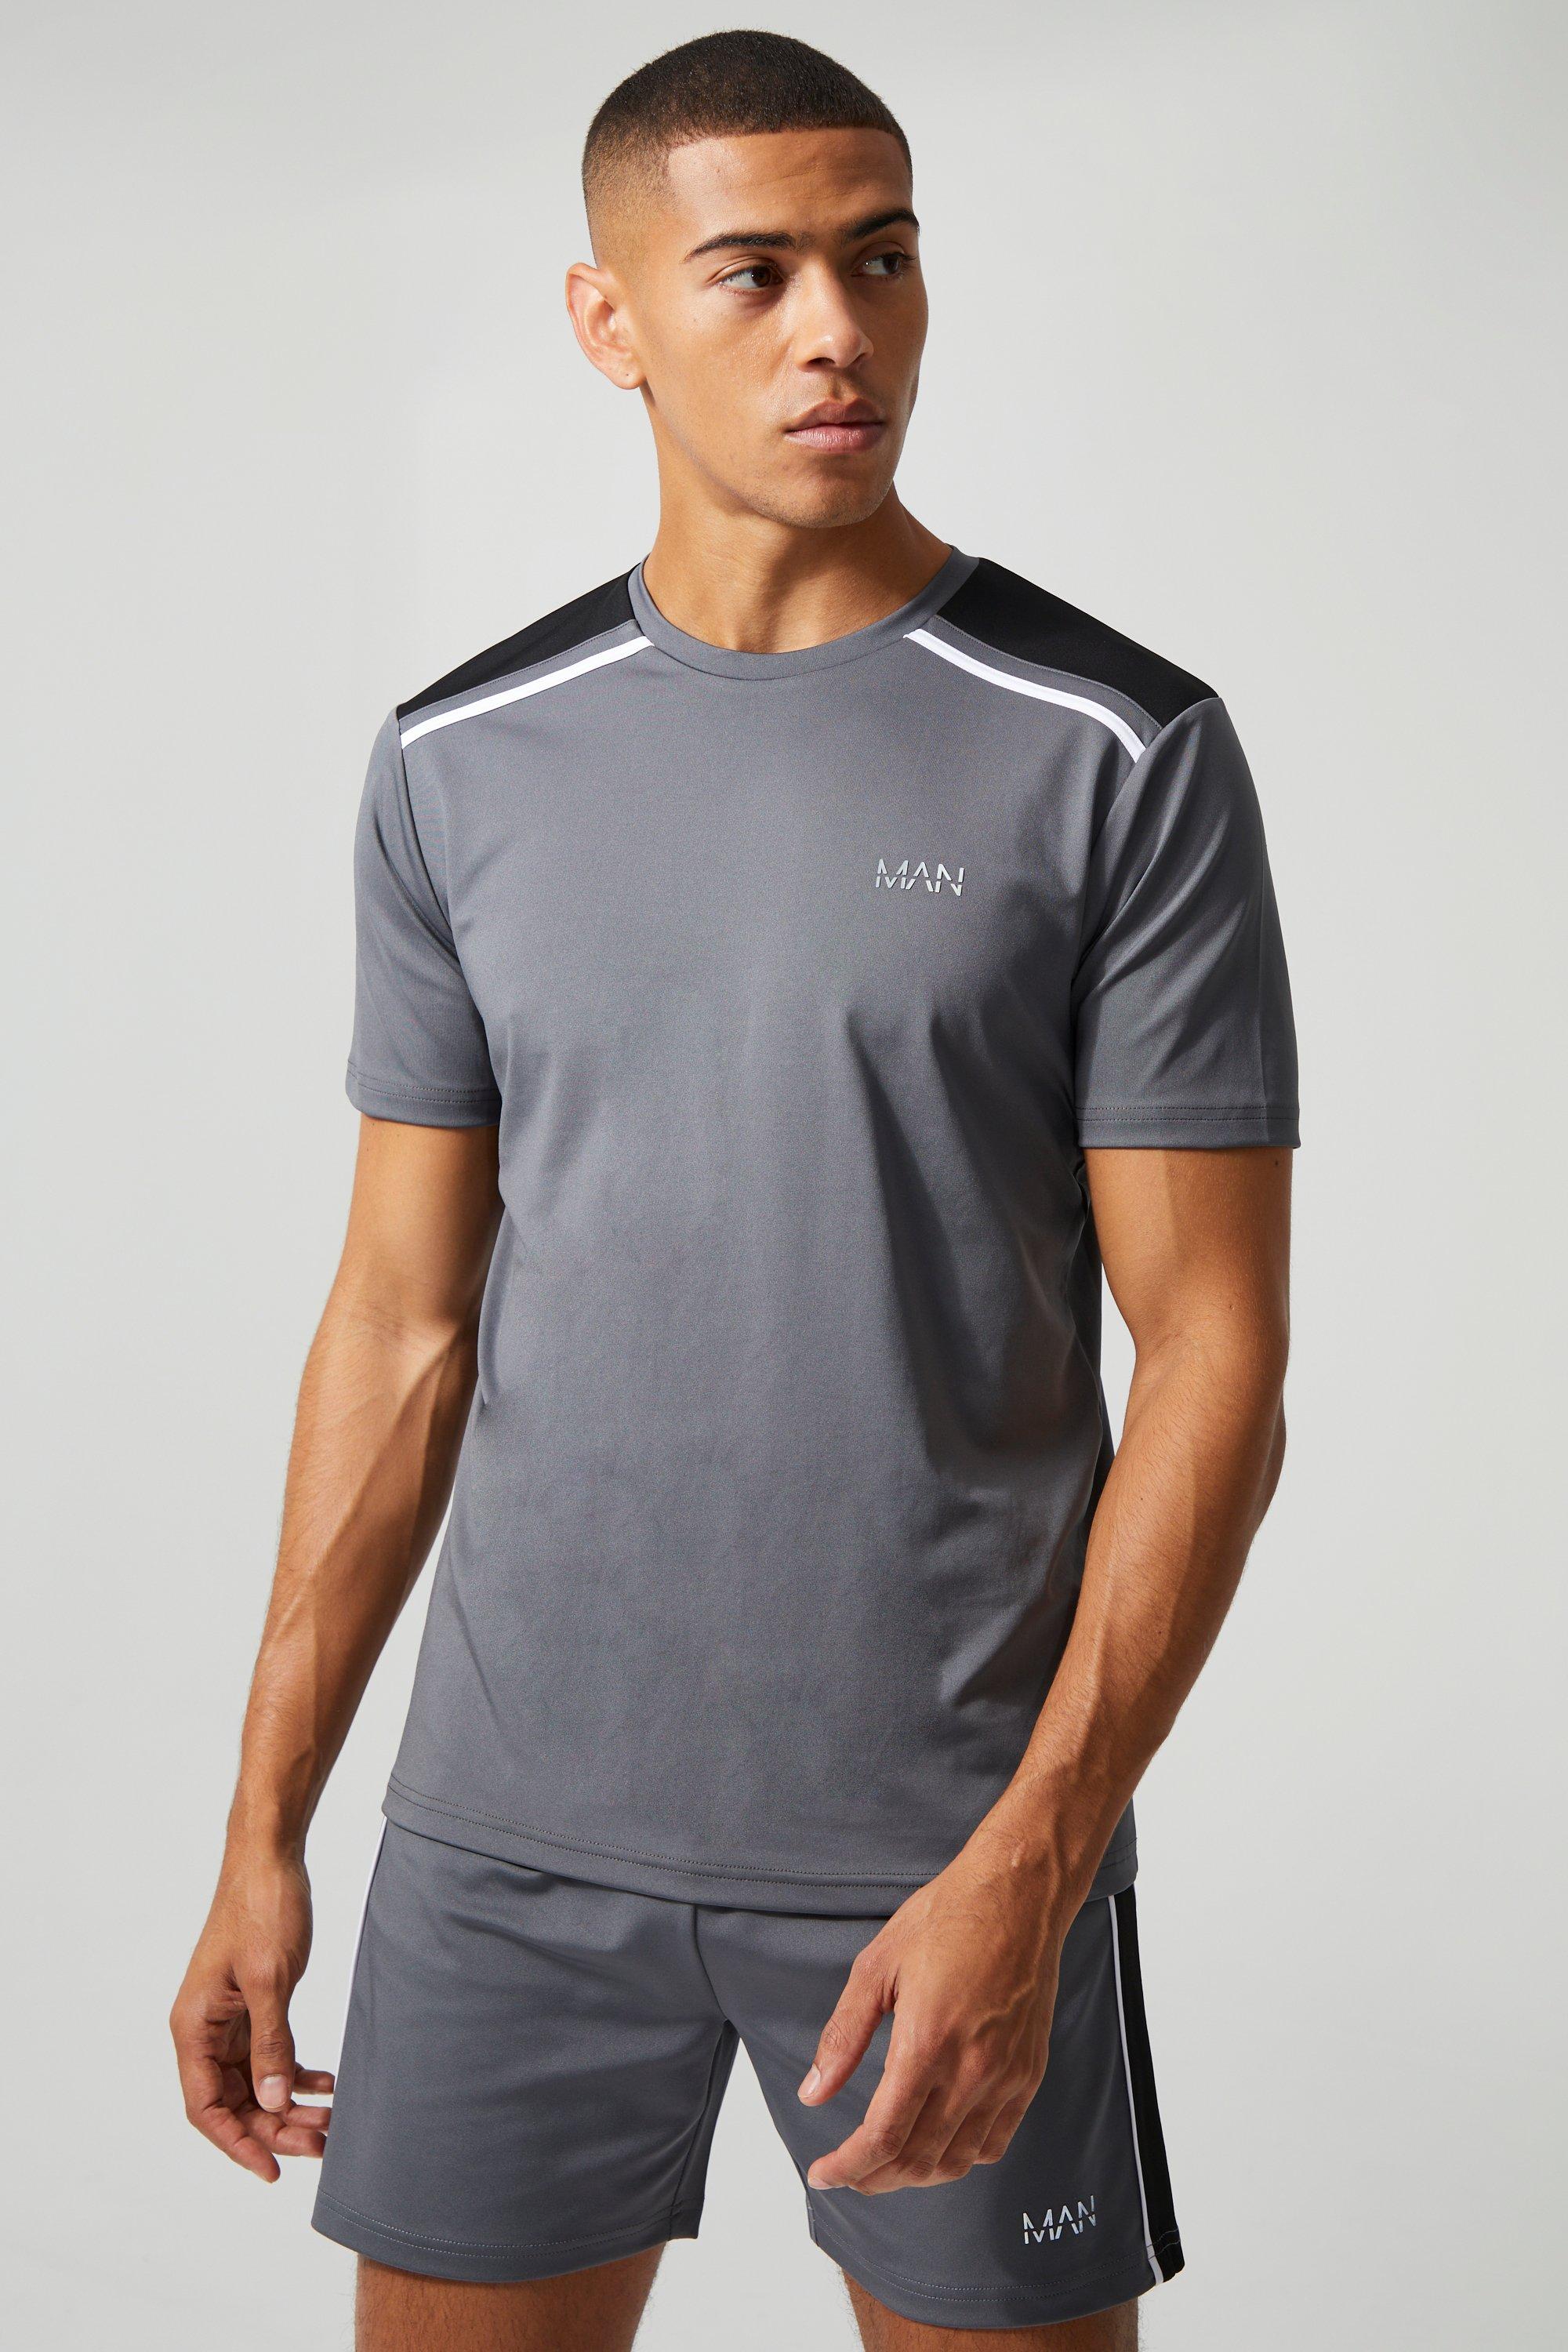 Man Active Voetbal Performance T-Shirt, Charcoal